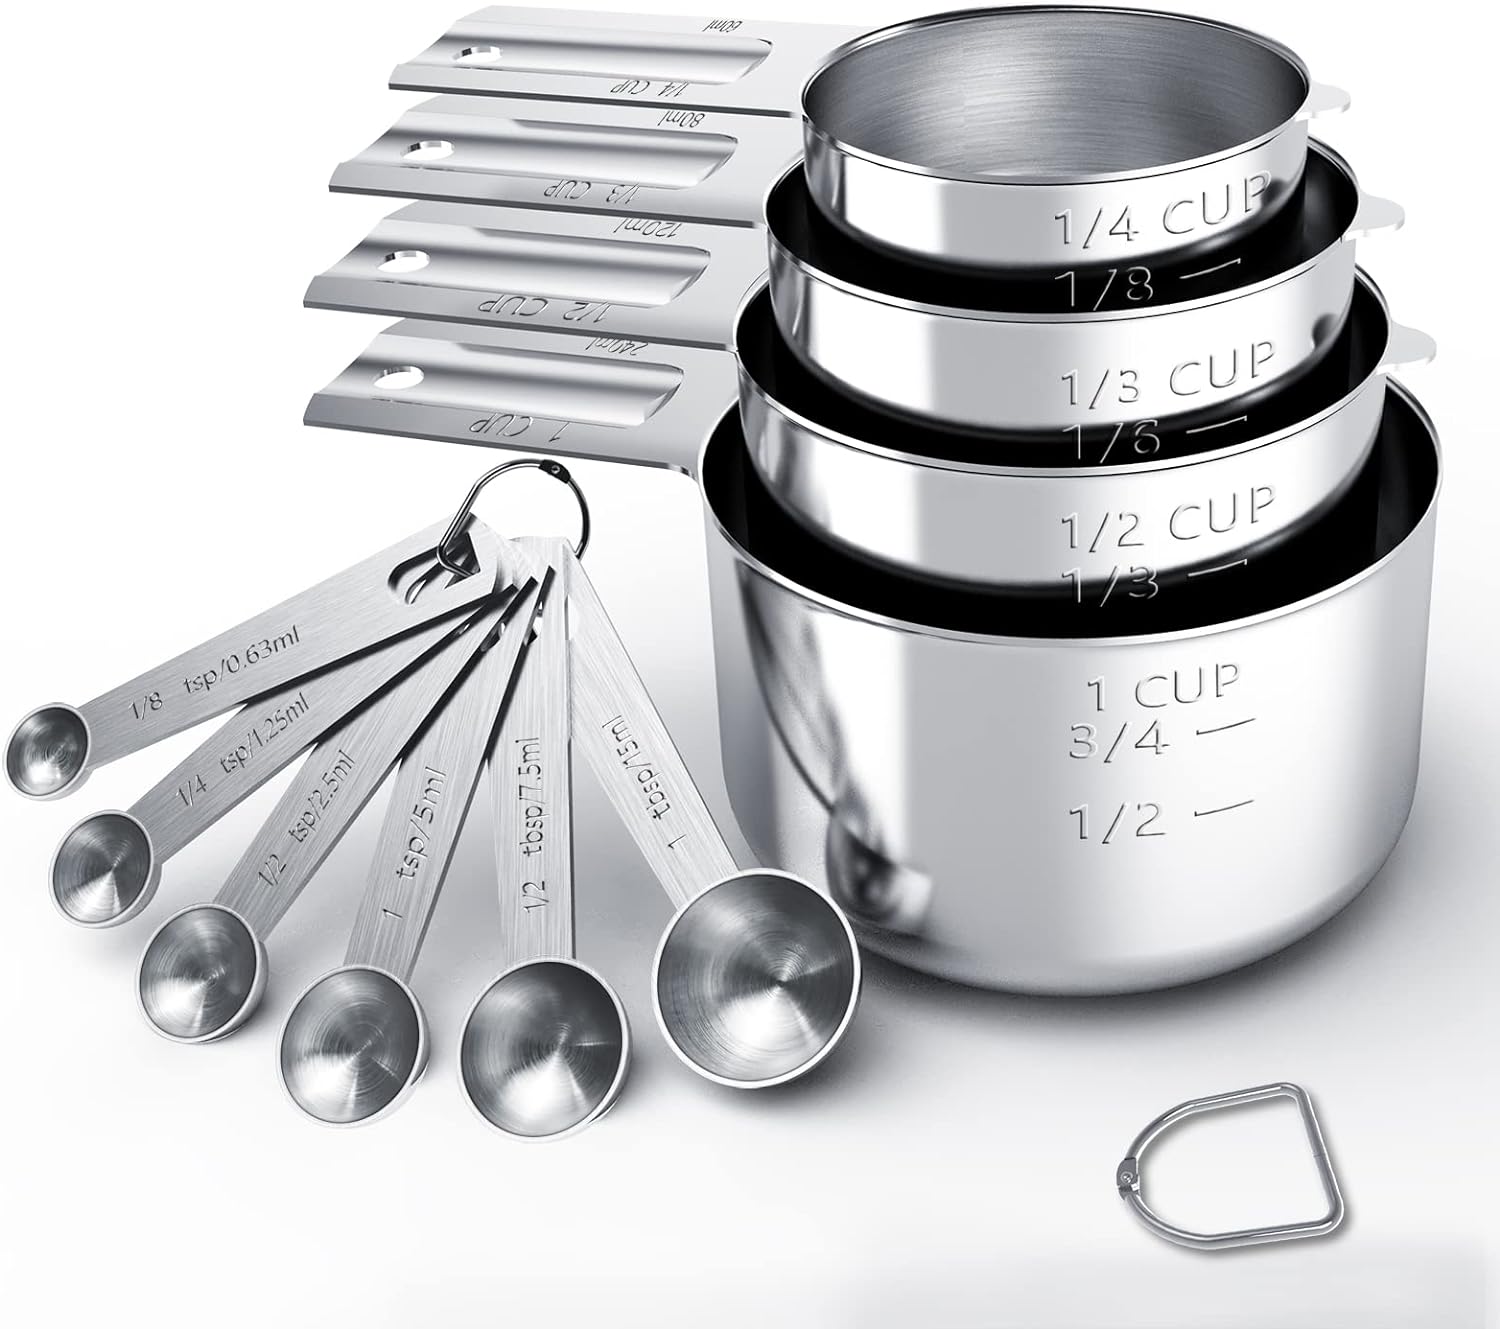 These measuring cups will upgrade your kitchen. Heavy duty and easy to read, use, and clean. Very nice!